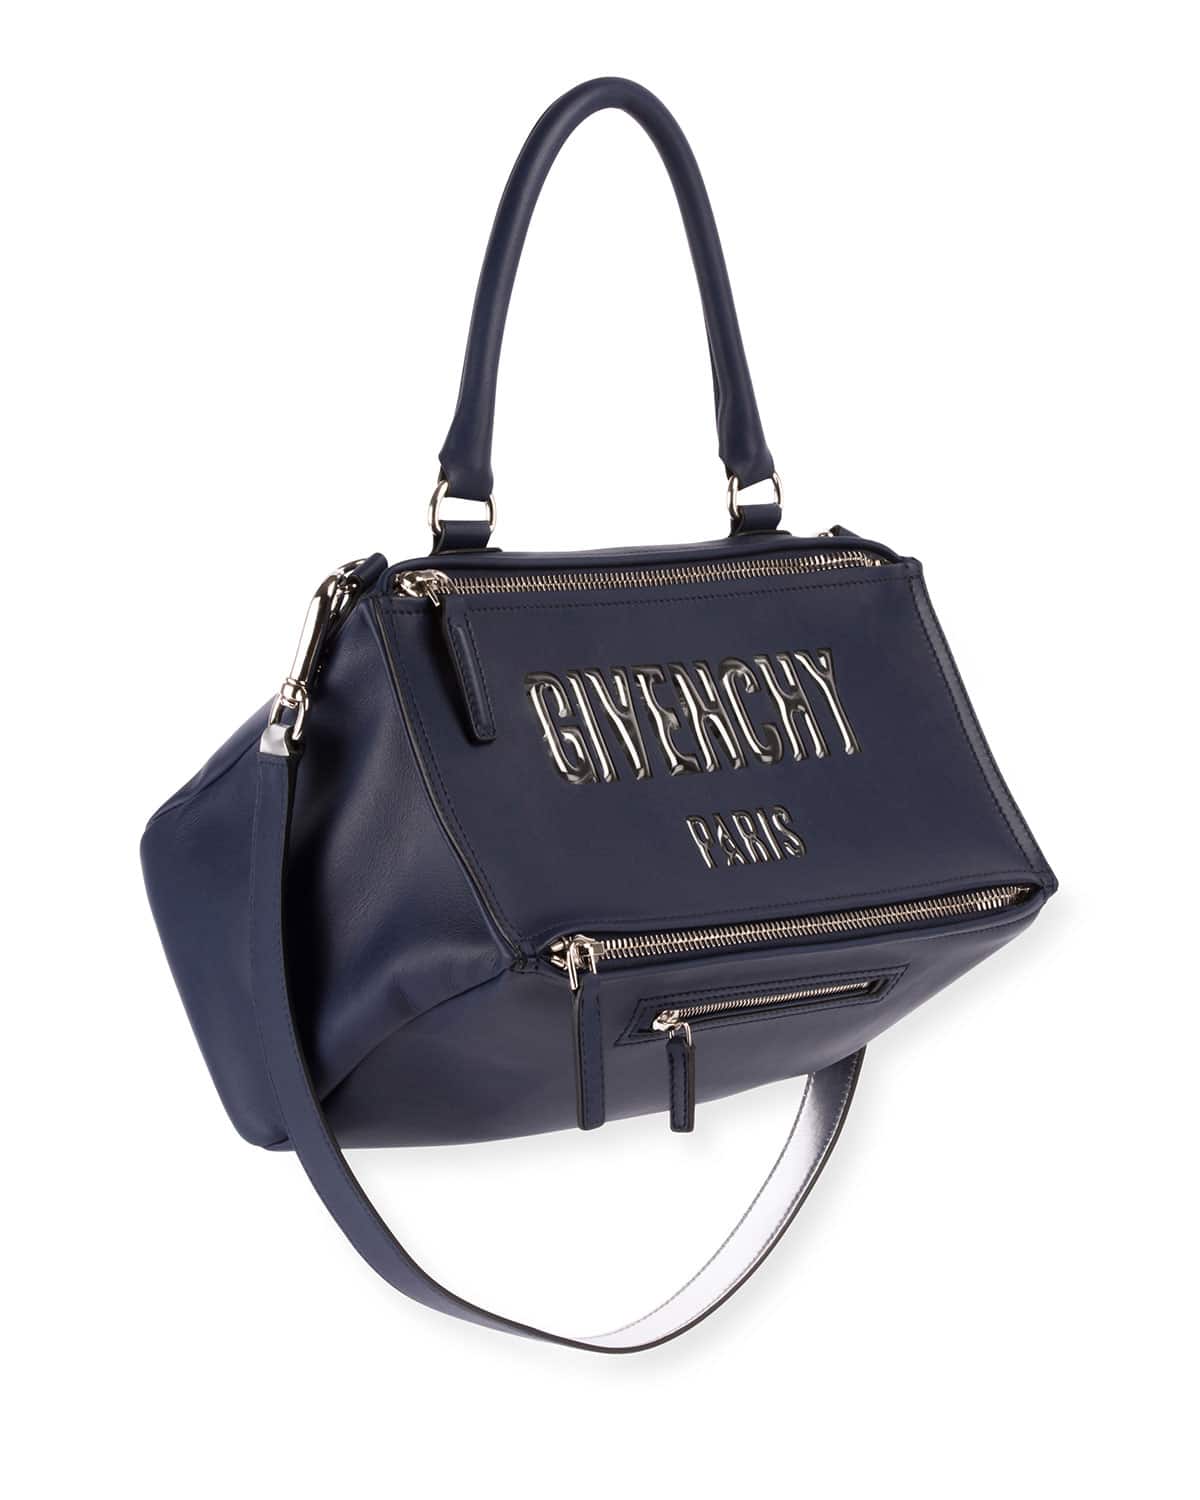 Givenchy Resort 2018 Bag Collection Features Logo Print - Spotted 